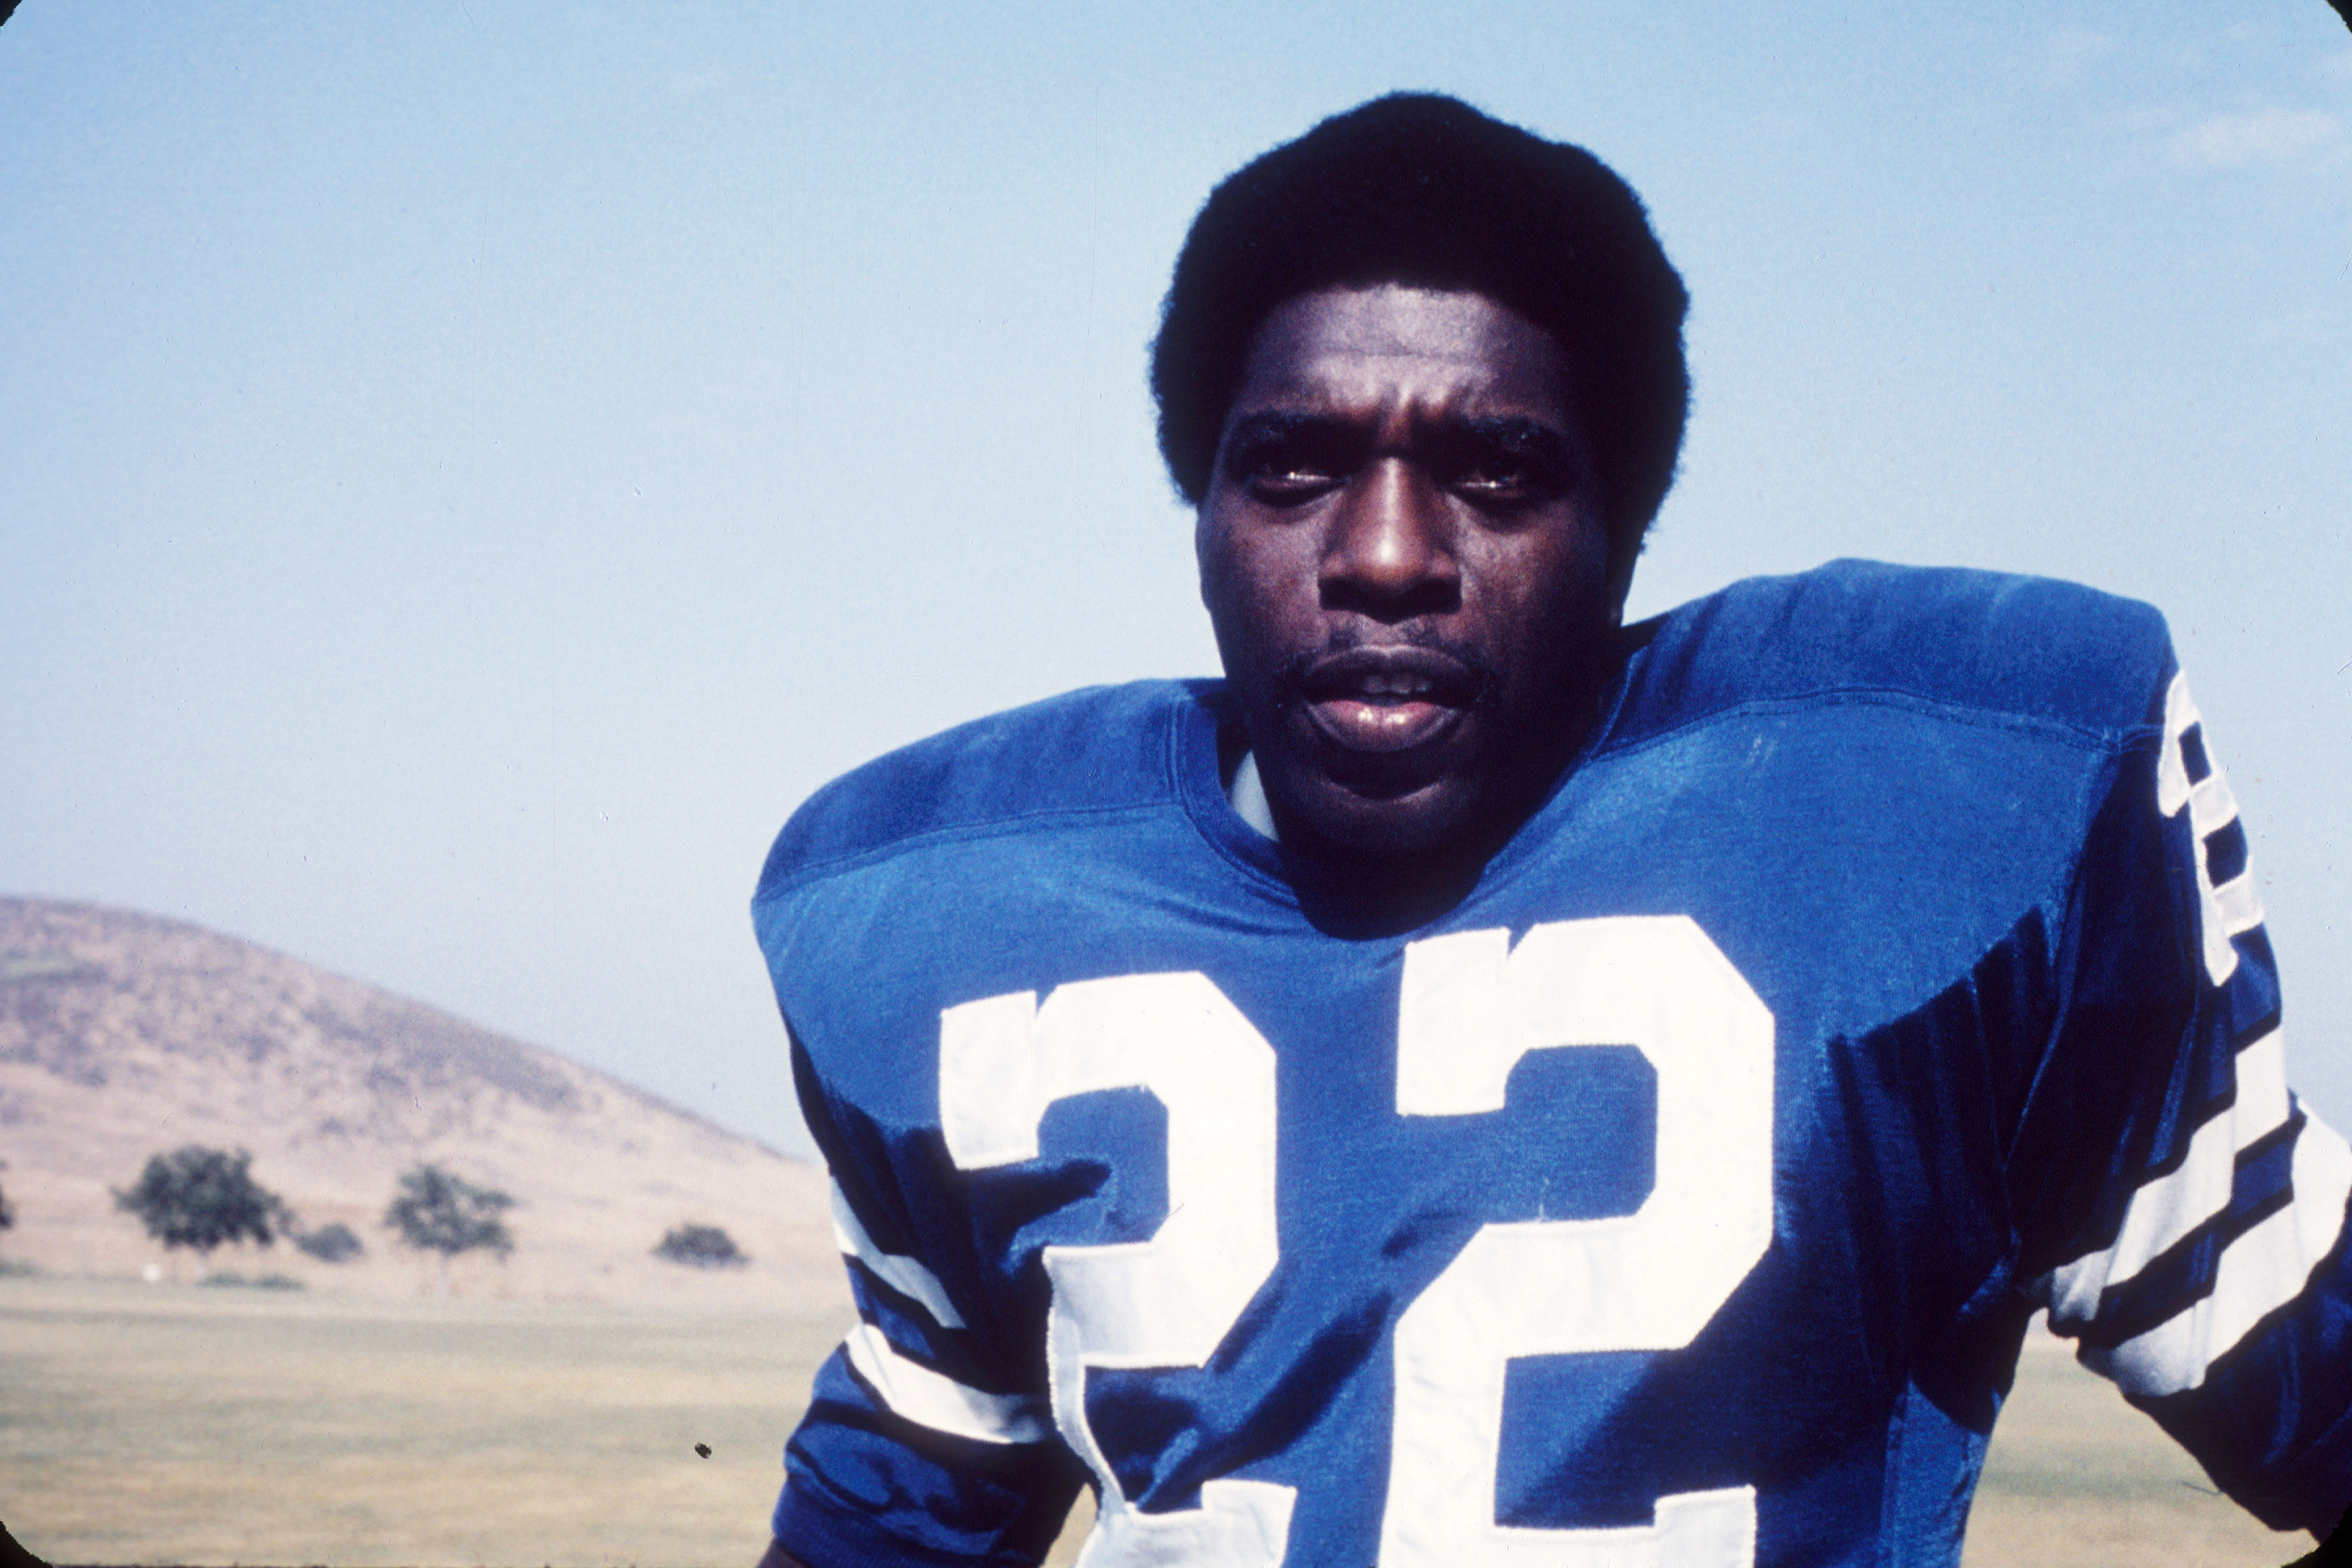 Cowboys Blog - Cowboys CTK: The Legend of 22, From Bob Hayes To Emmitt Smith